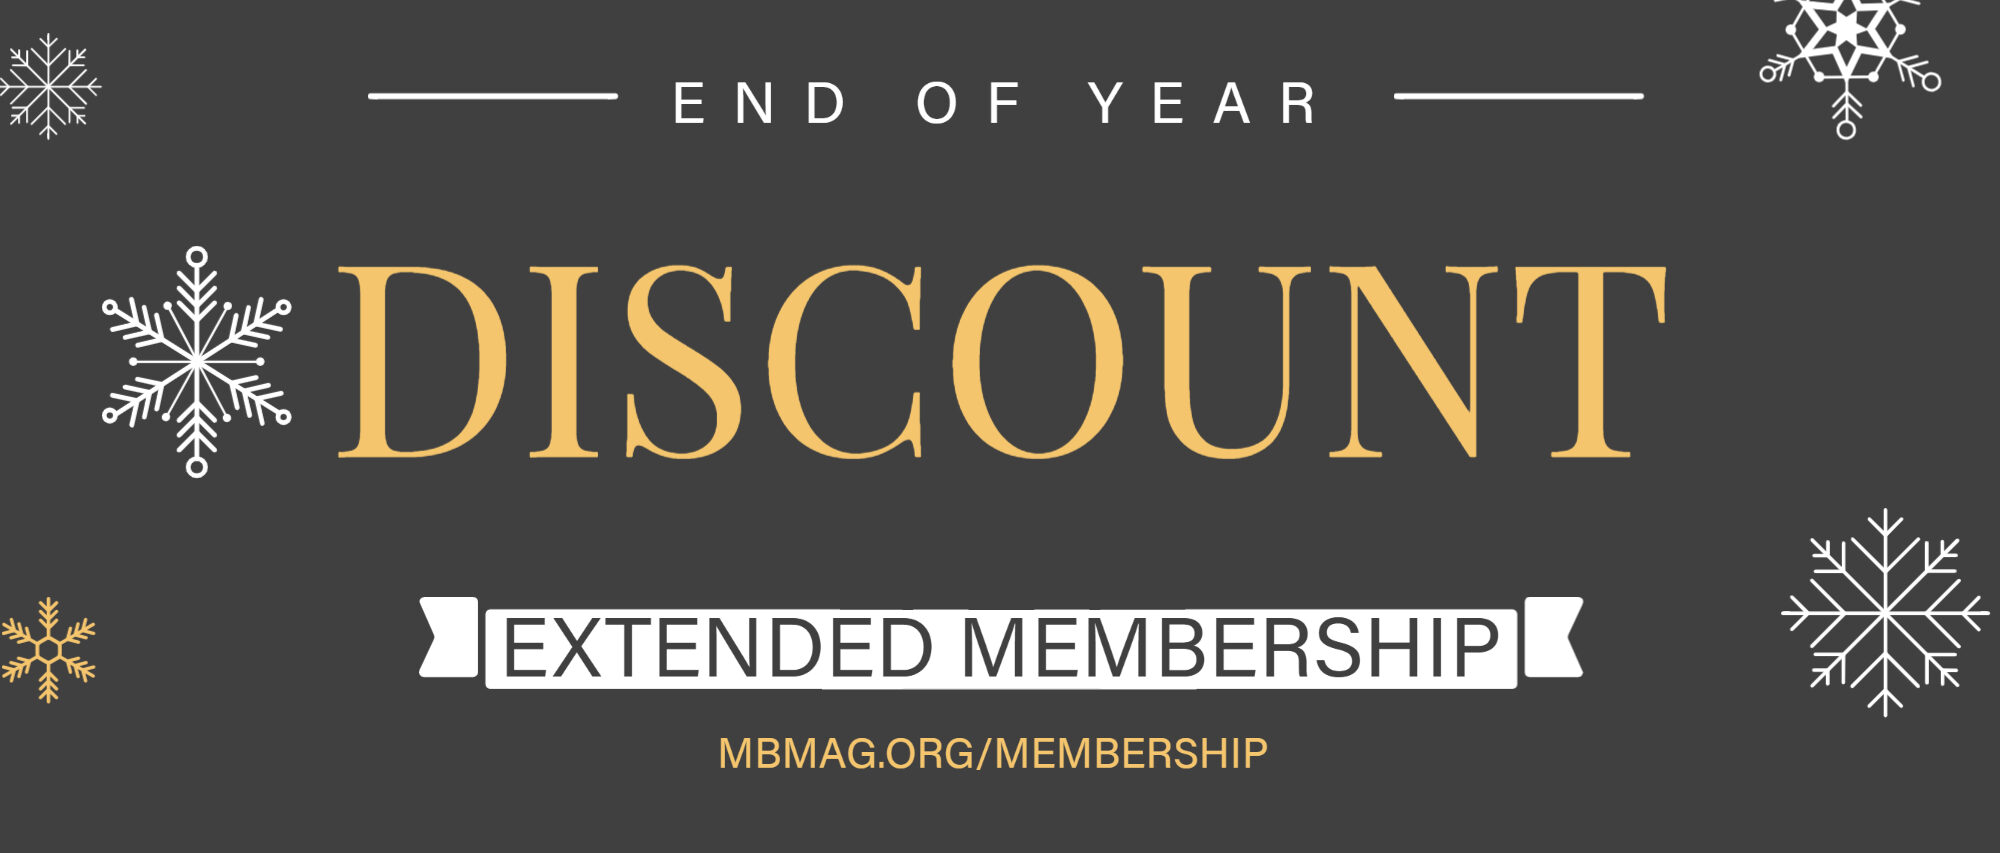 dark gray background, butter yellow text and white text banner for our annual membership discount for members who join or renew between 10/15 and 12/31